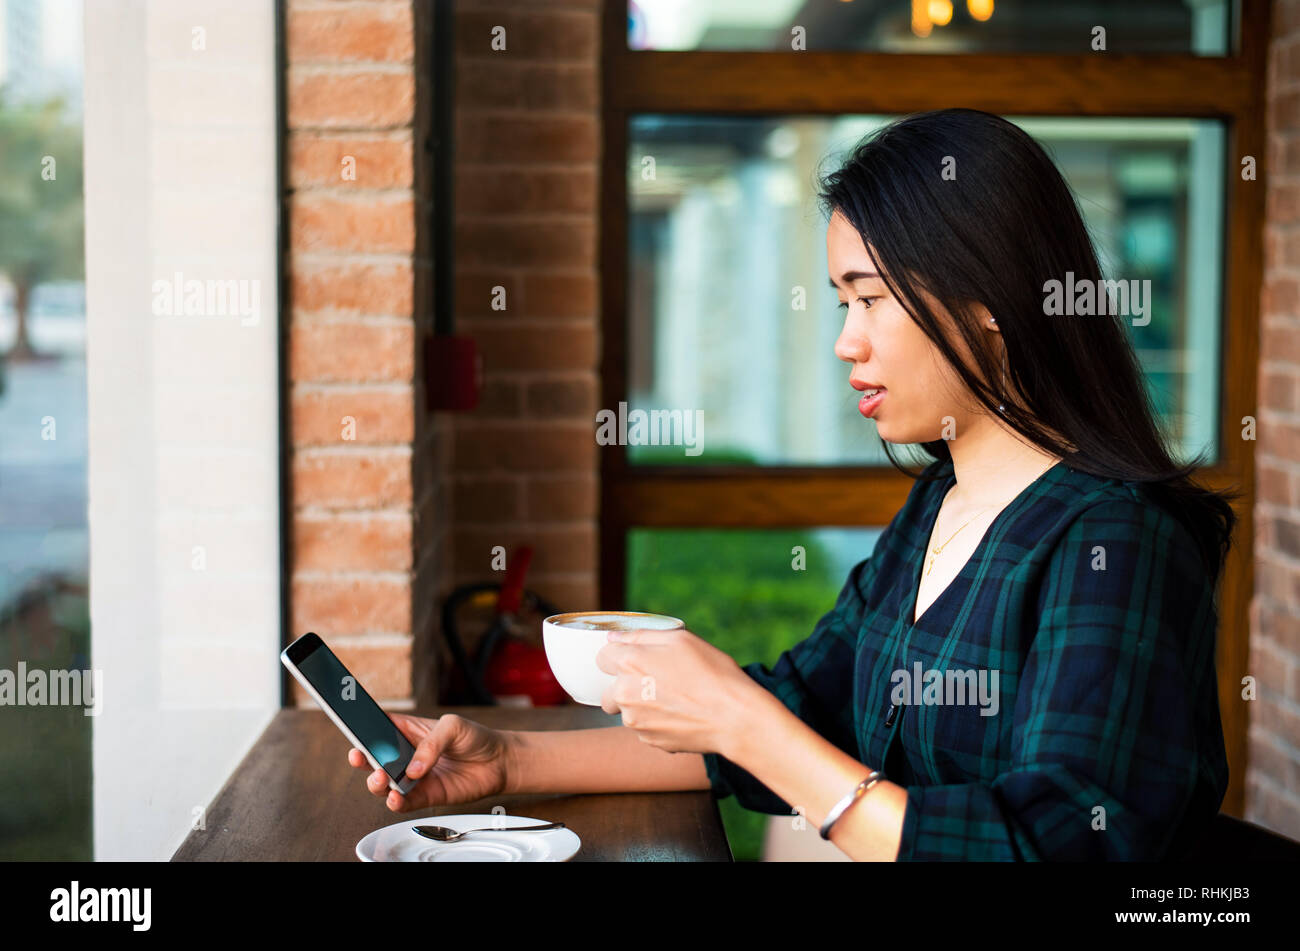 Girl having a cup of coffee and using phone in the bar Stock Photo